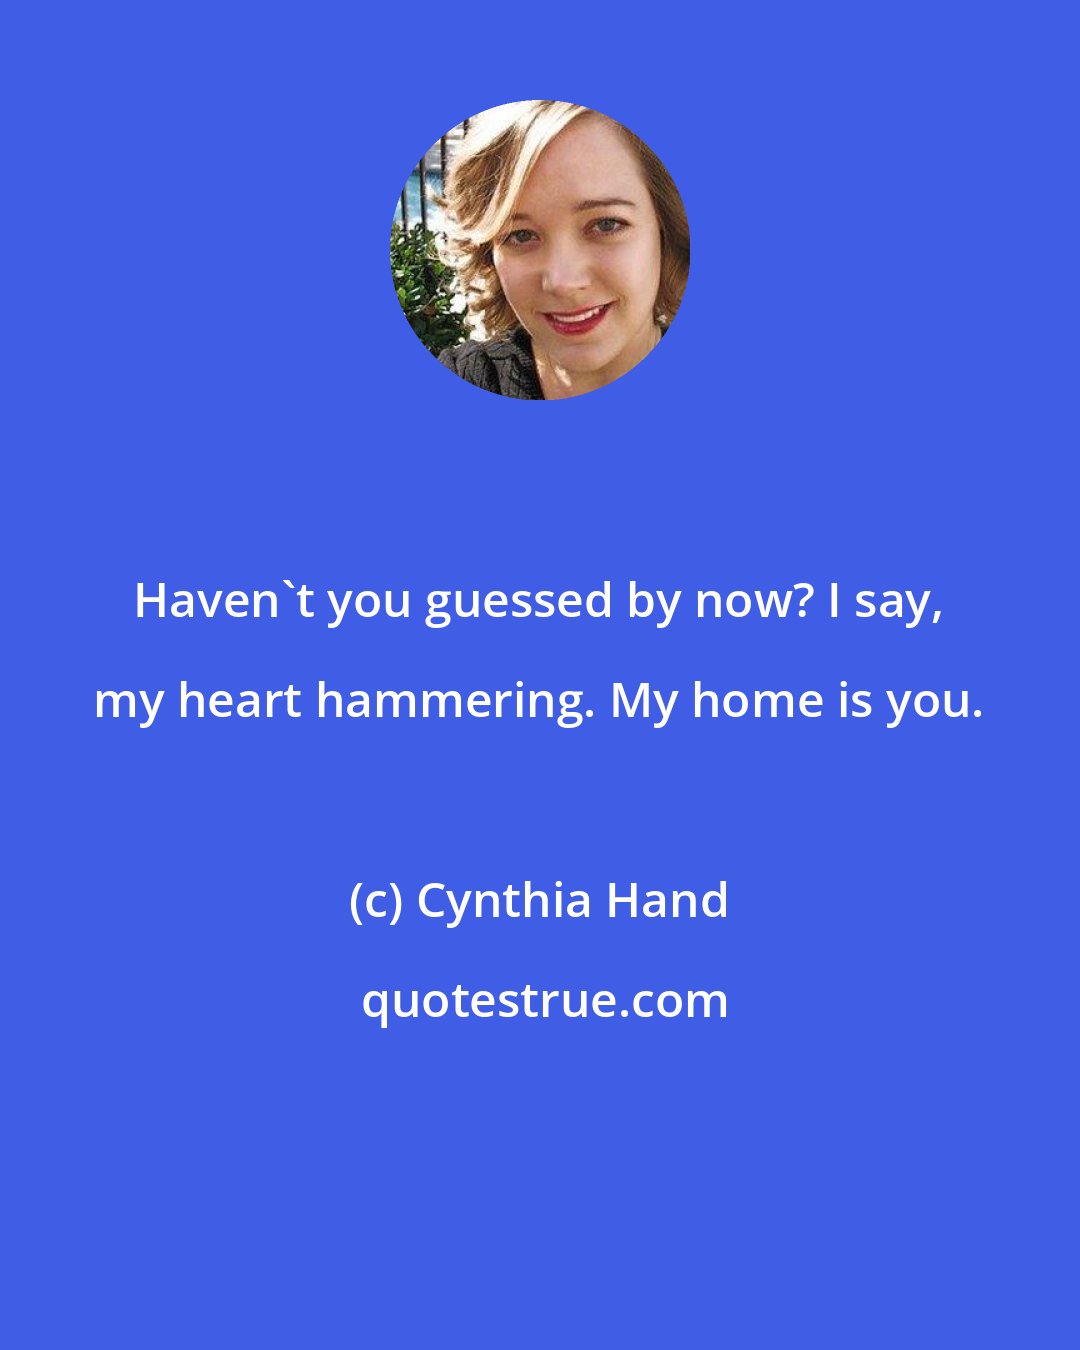 Cynthia Hand: Haven't you guessed by now? I say, my heart hammering. My home is you.